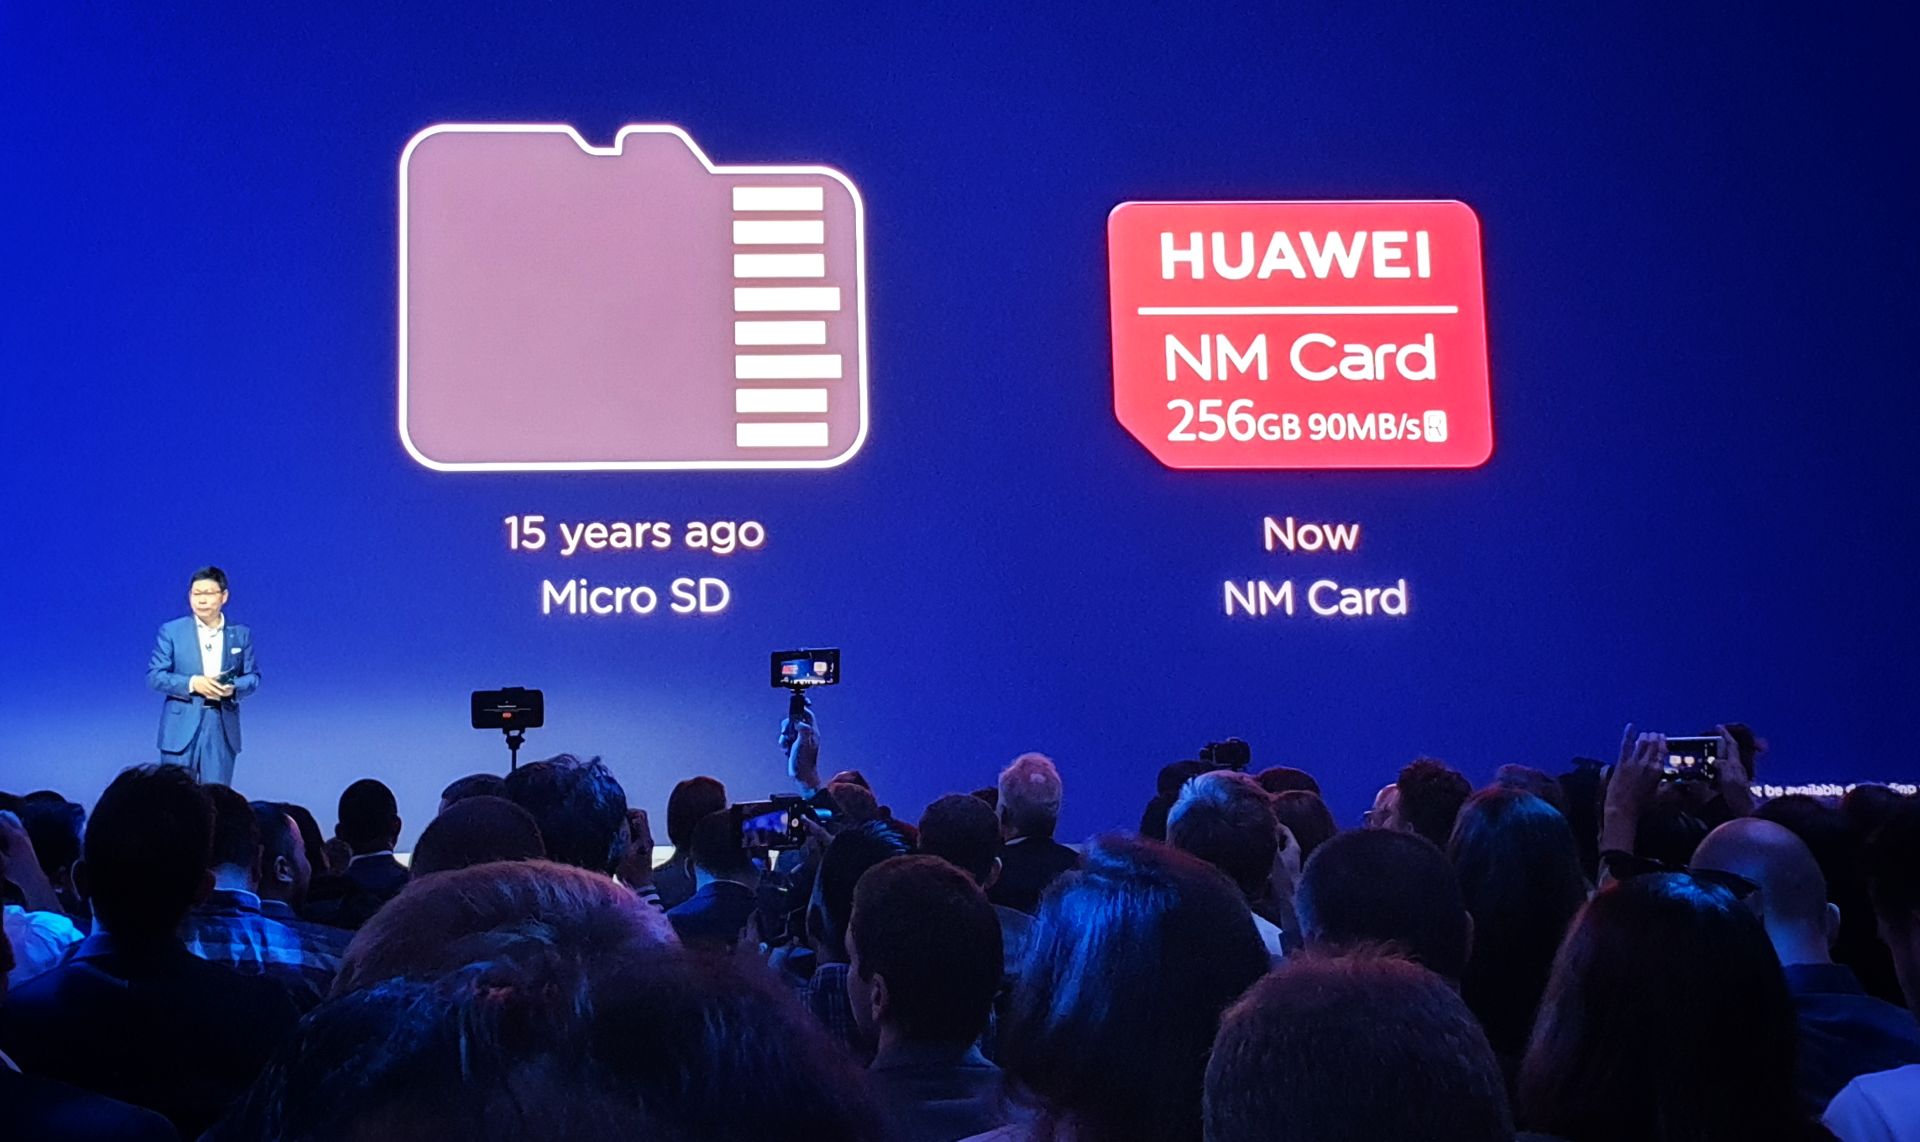 Huawei Mate 20 Pro launch with Nano Memory on display